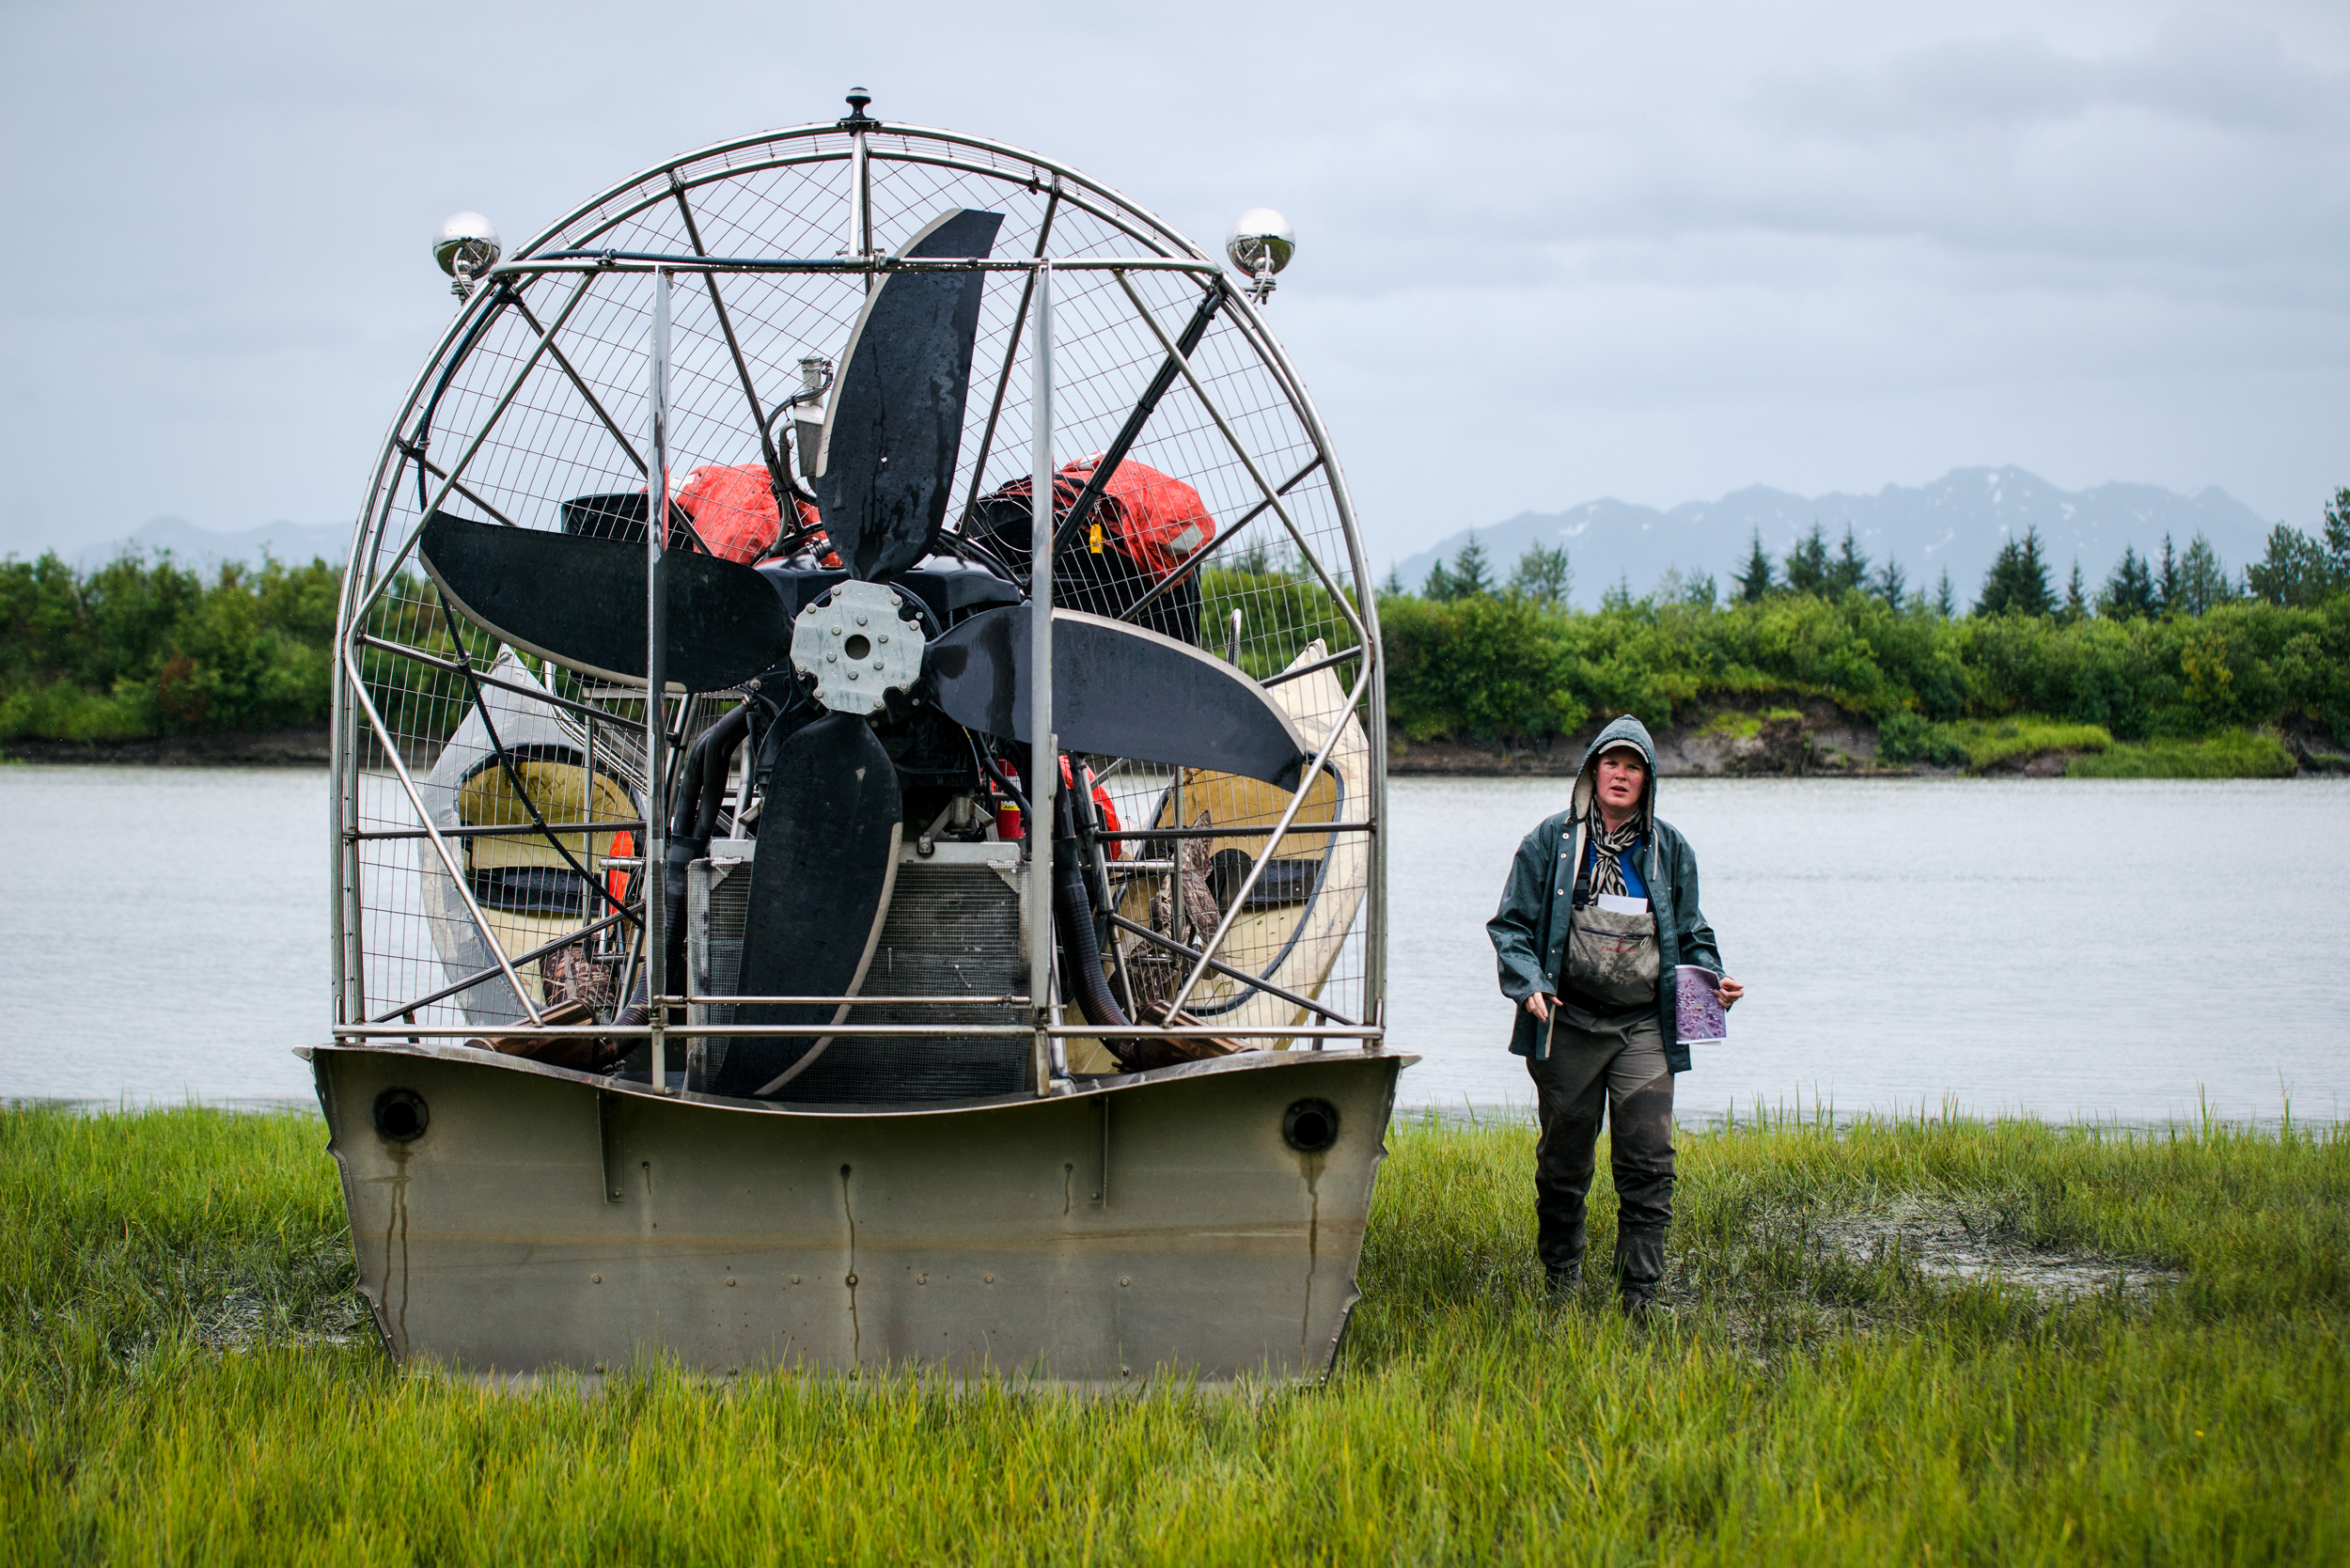  The easiest way to navigate the shallow waters on the Copper River Delta, especially during low tide, is via air boat. But Gabrielson and her crew can only take them so far into the Delta before the mission must be completed via “poke boat”. 